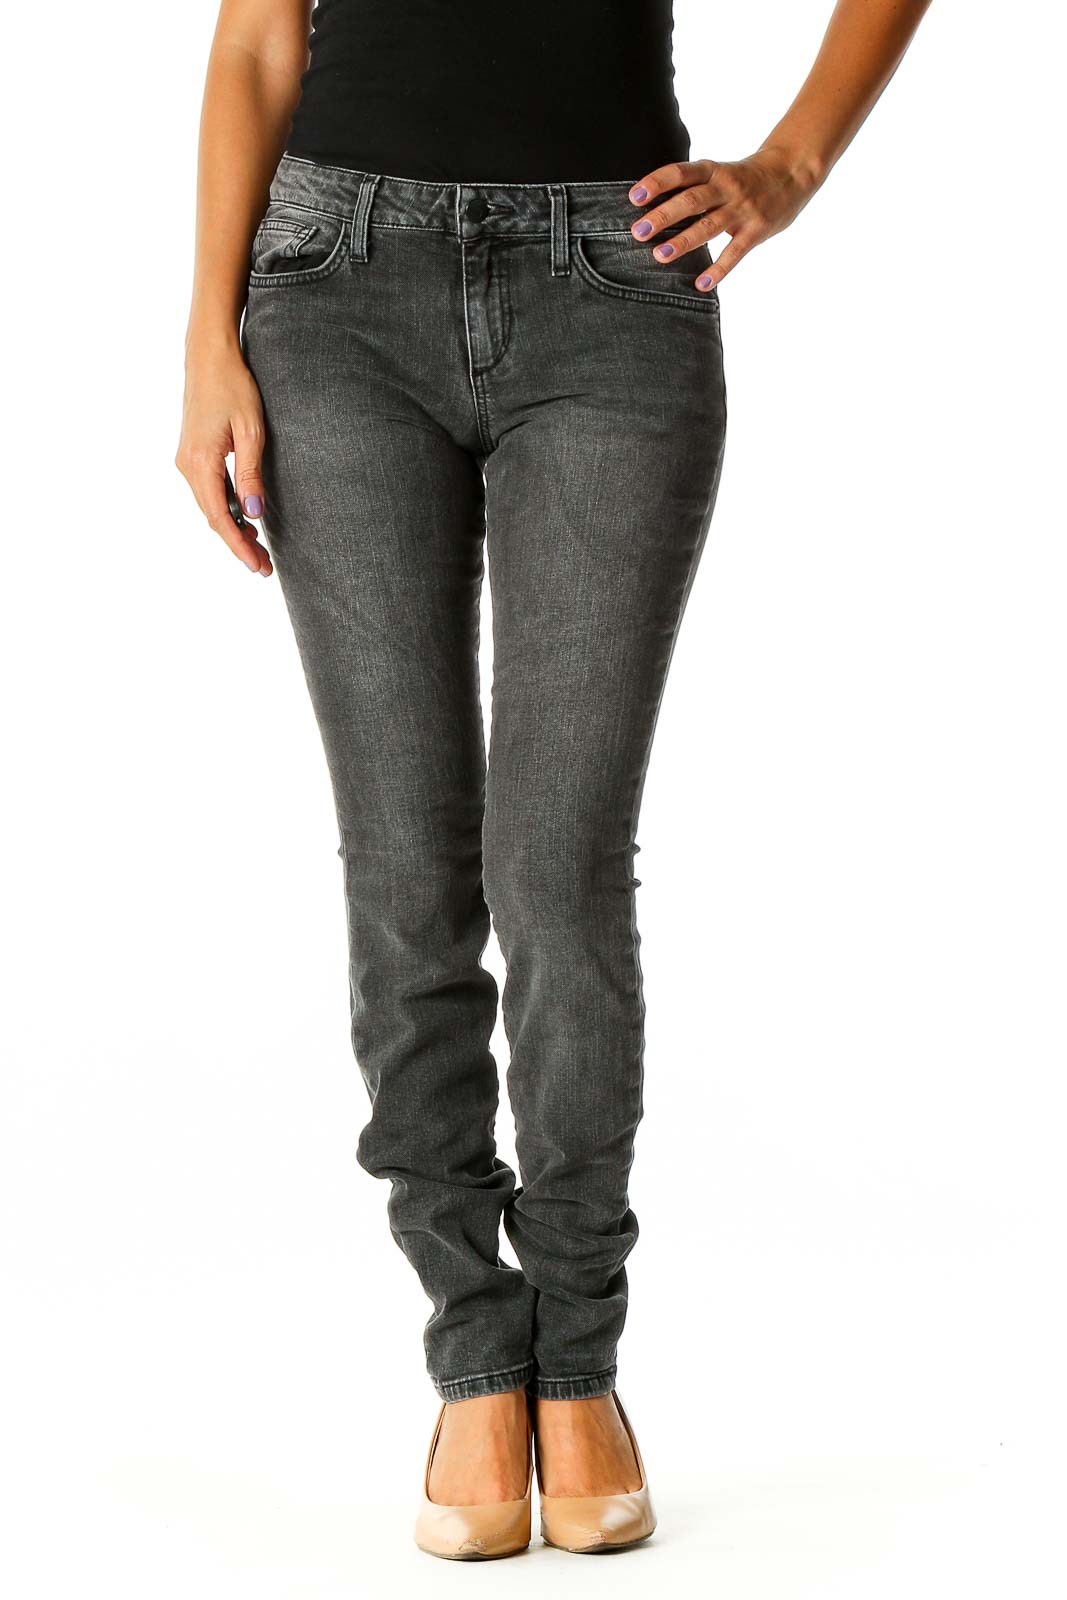 Gray Casual Skinny Jeans Front